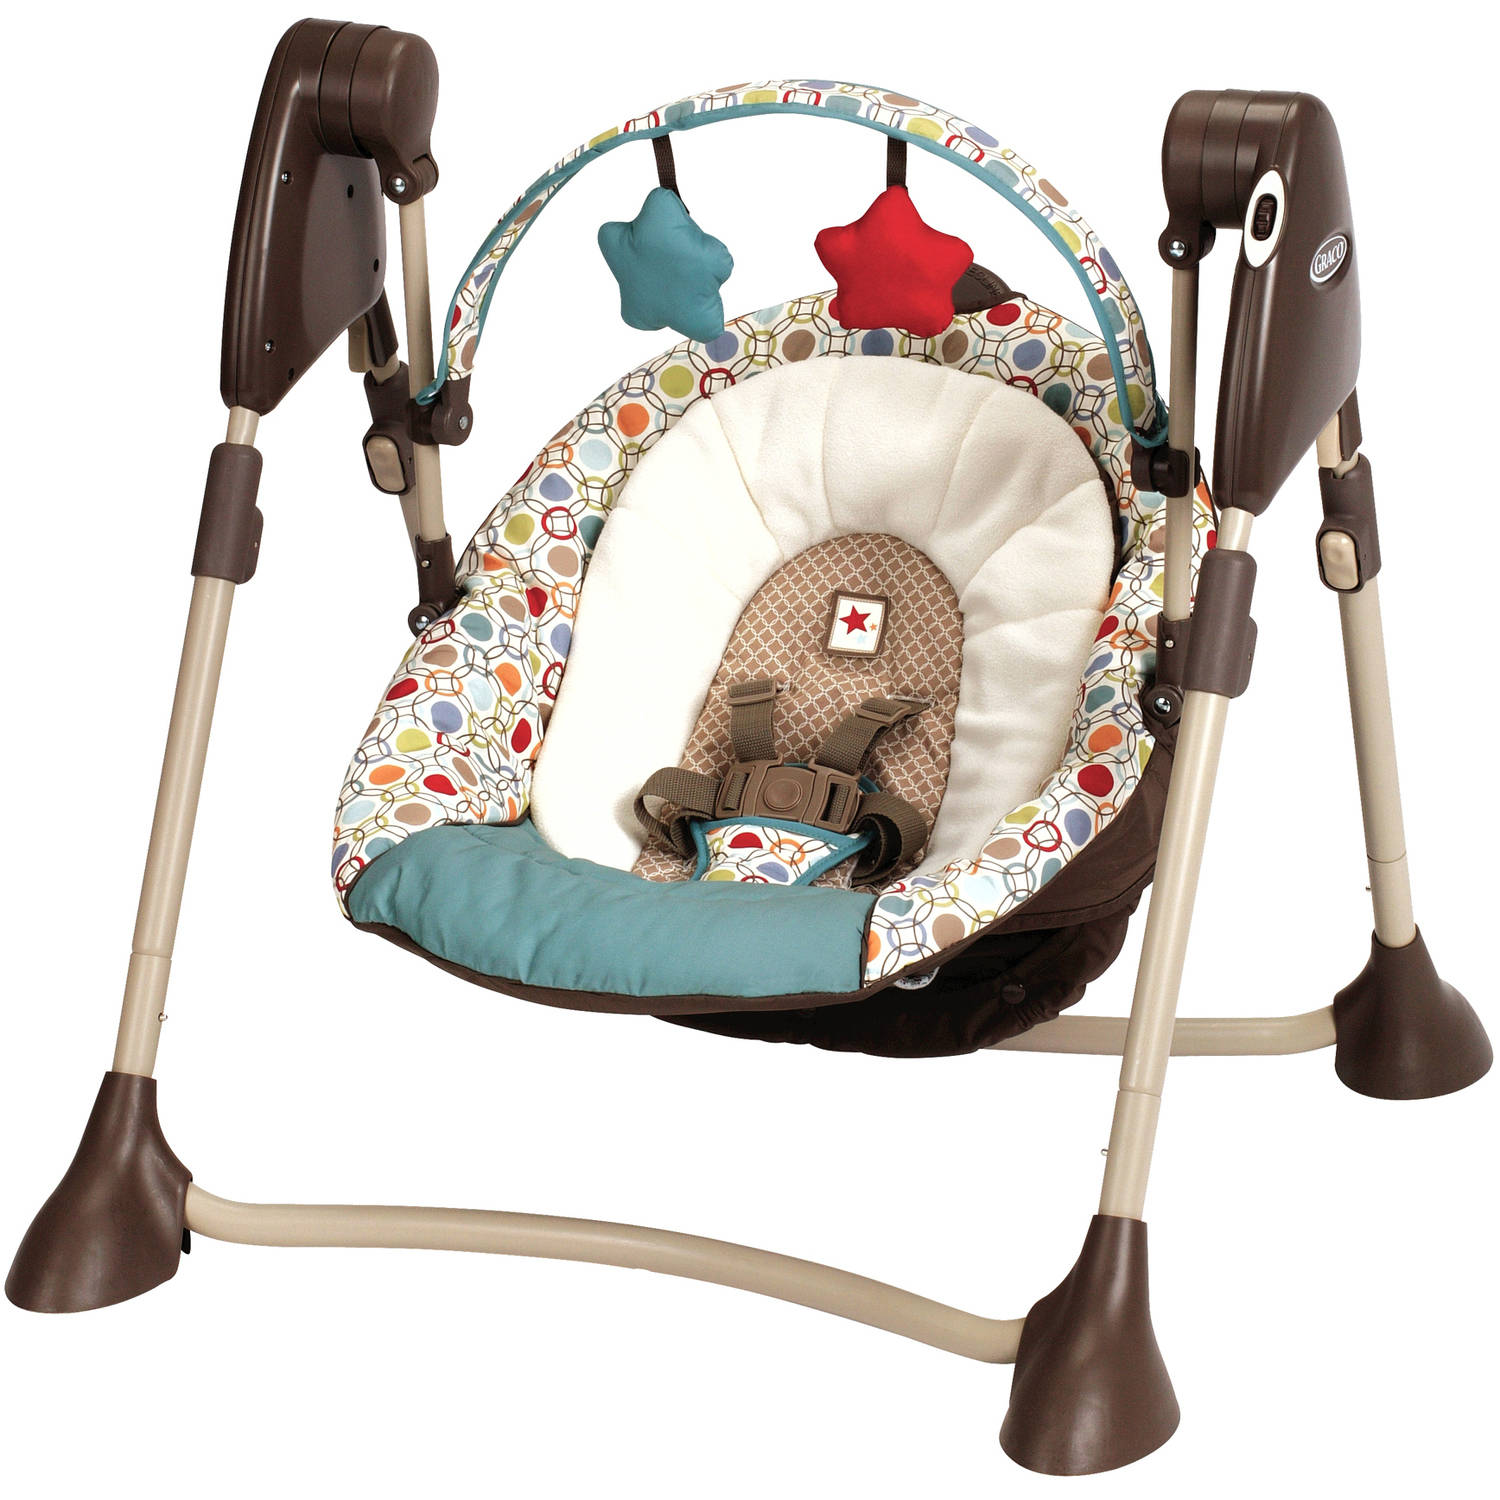 Graco Swing By Me Twister - image 1 of 6